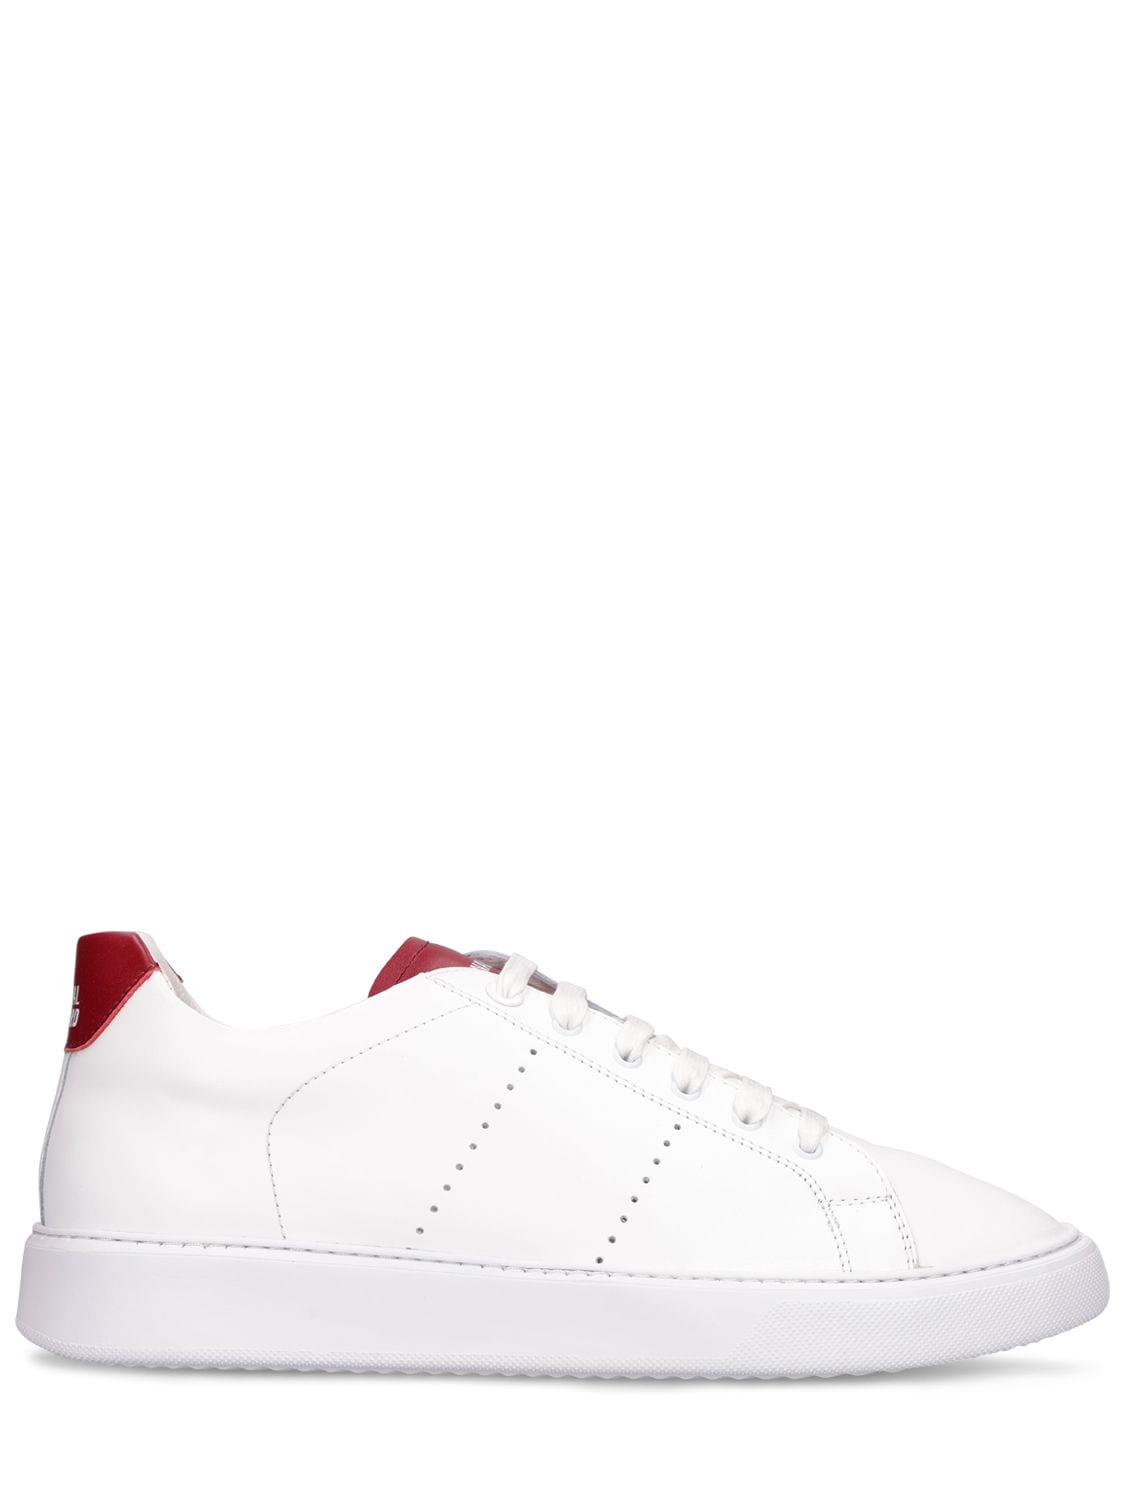 NATIONAL STANDARD EDITION 9 LEATHER LOW trainers